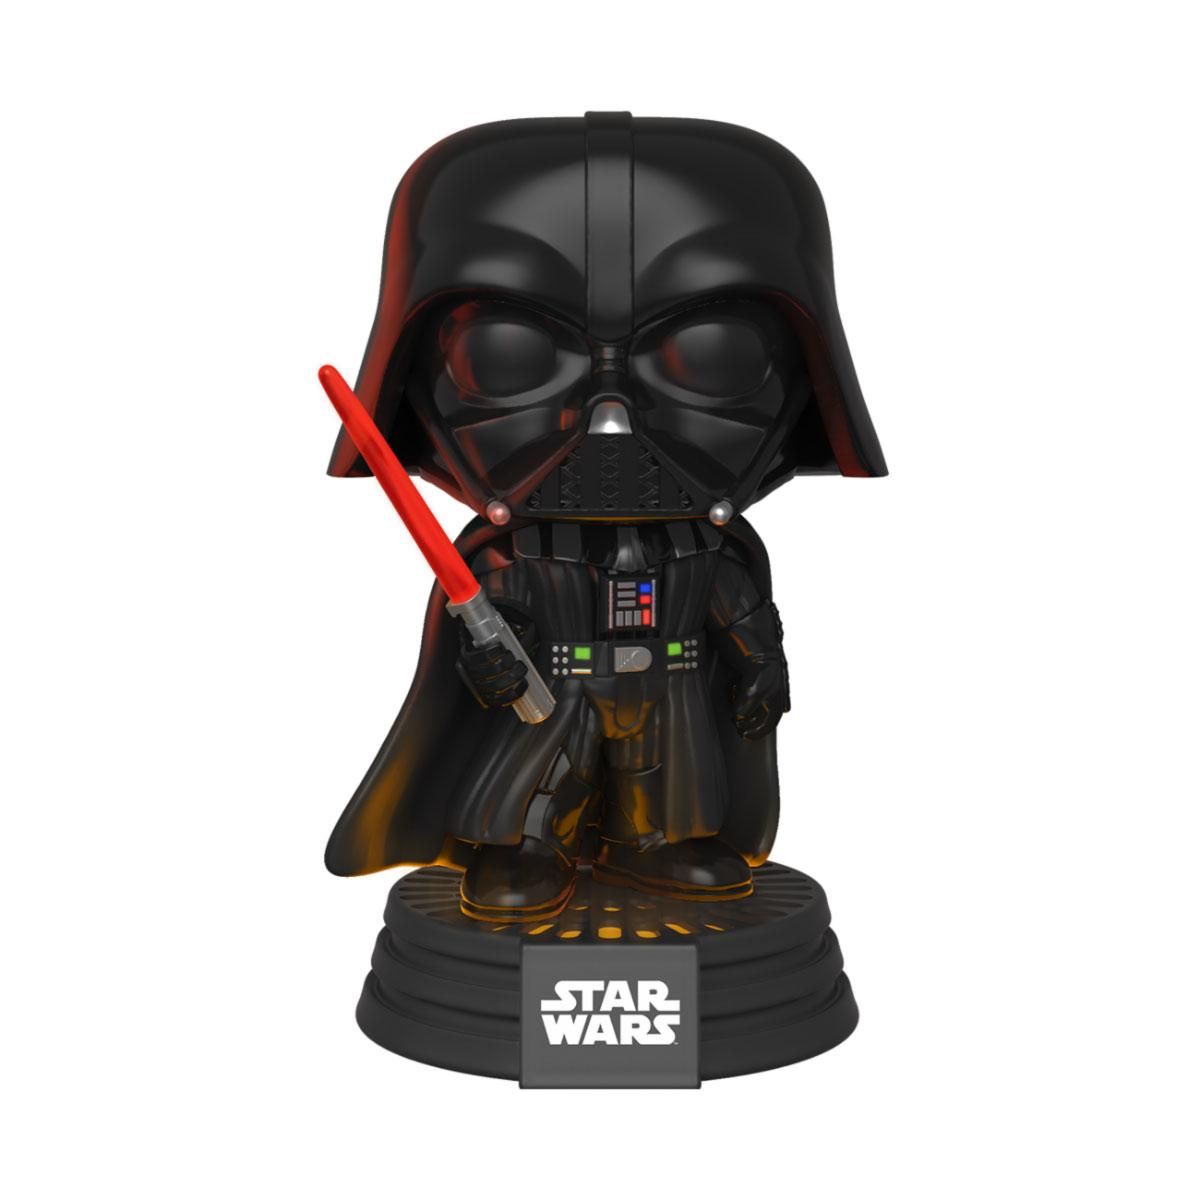 Star Wars Electronic POP! Movies Vinyl Figure with Sound & Light Up Darth Vader 9 cm Funko